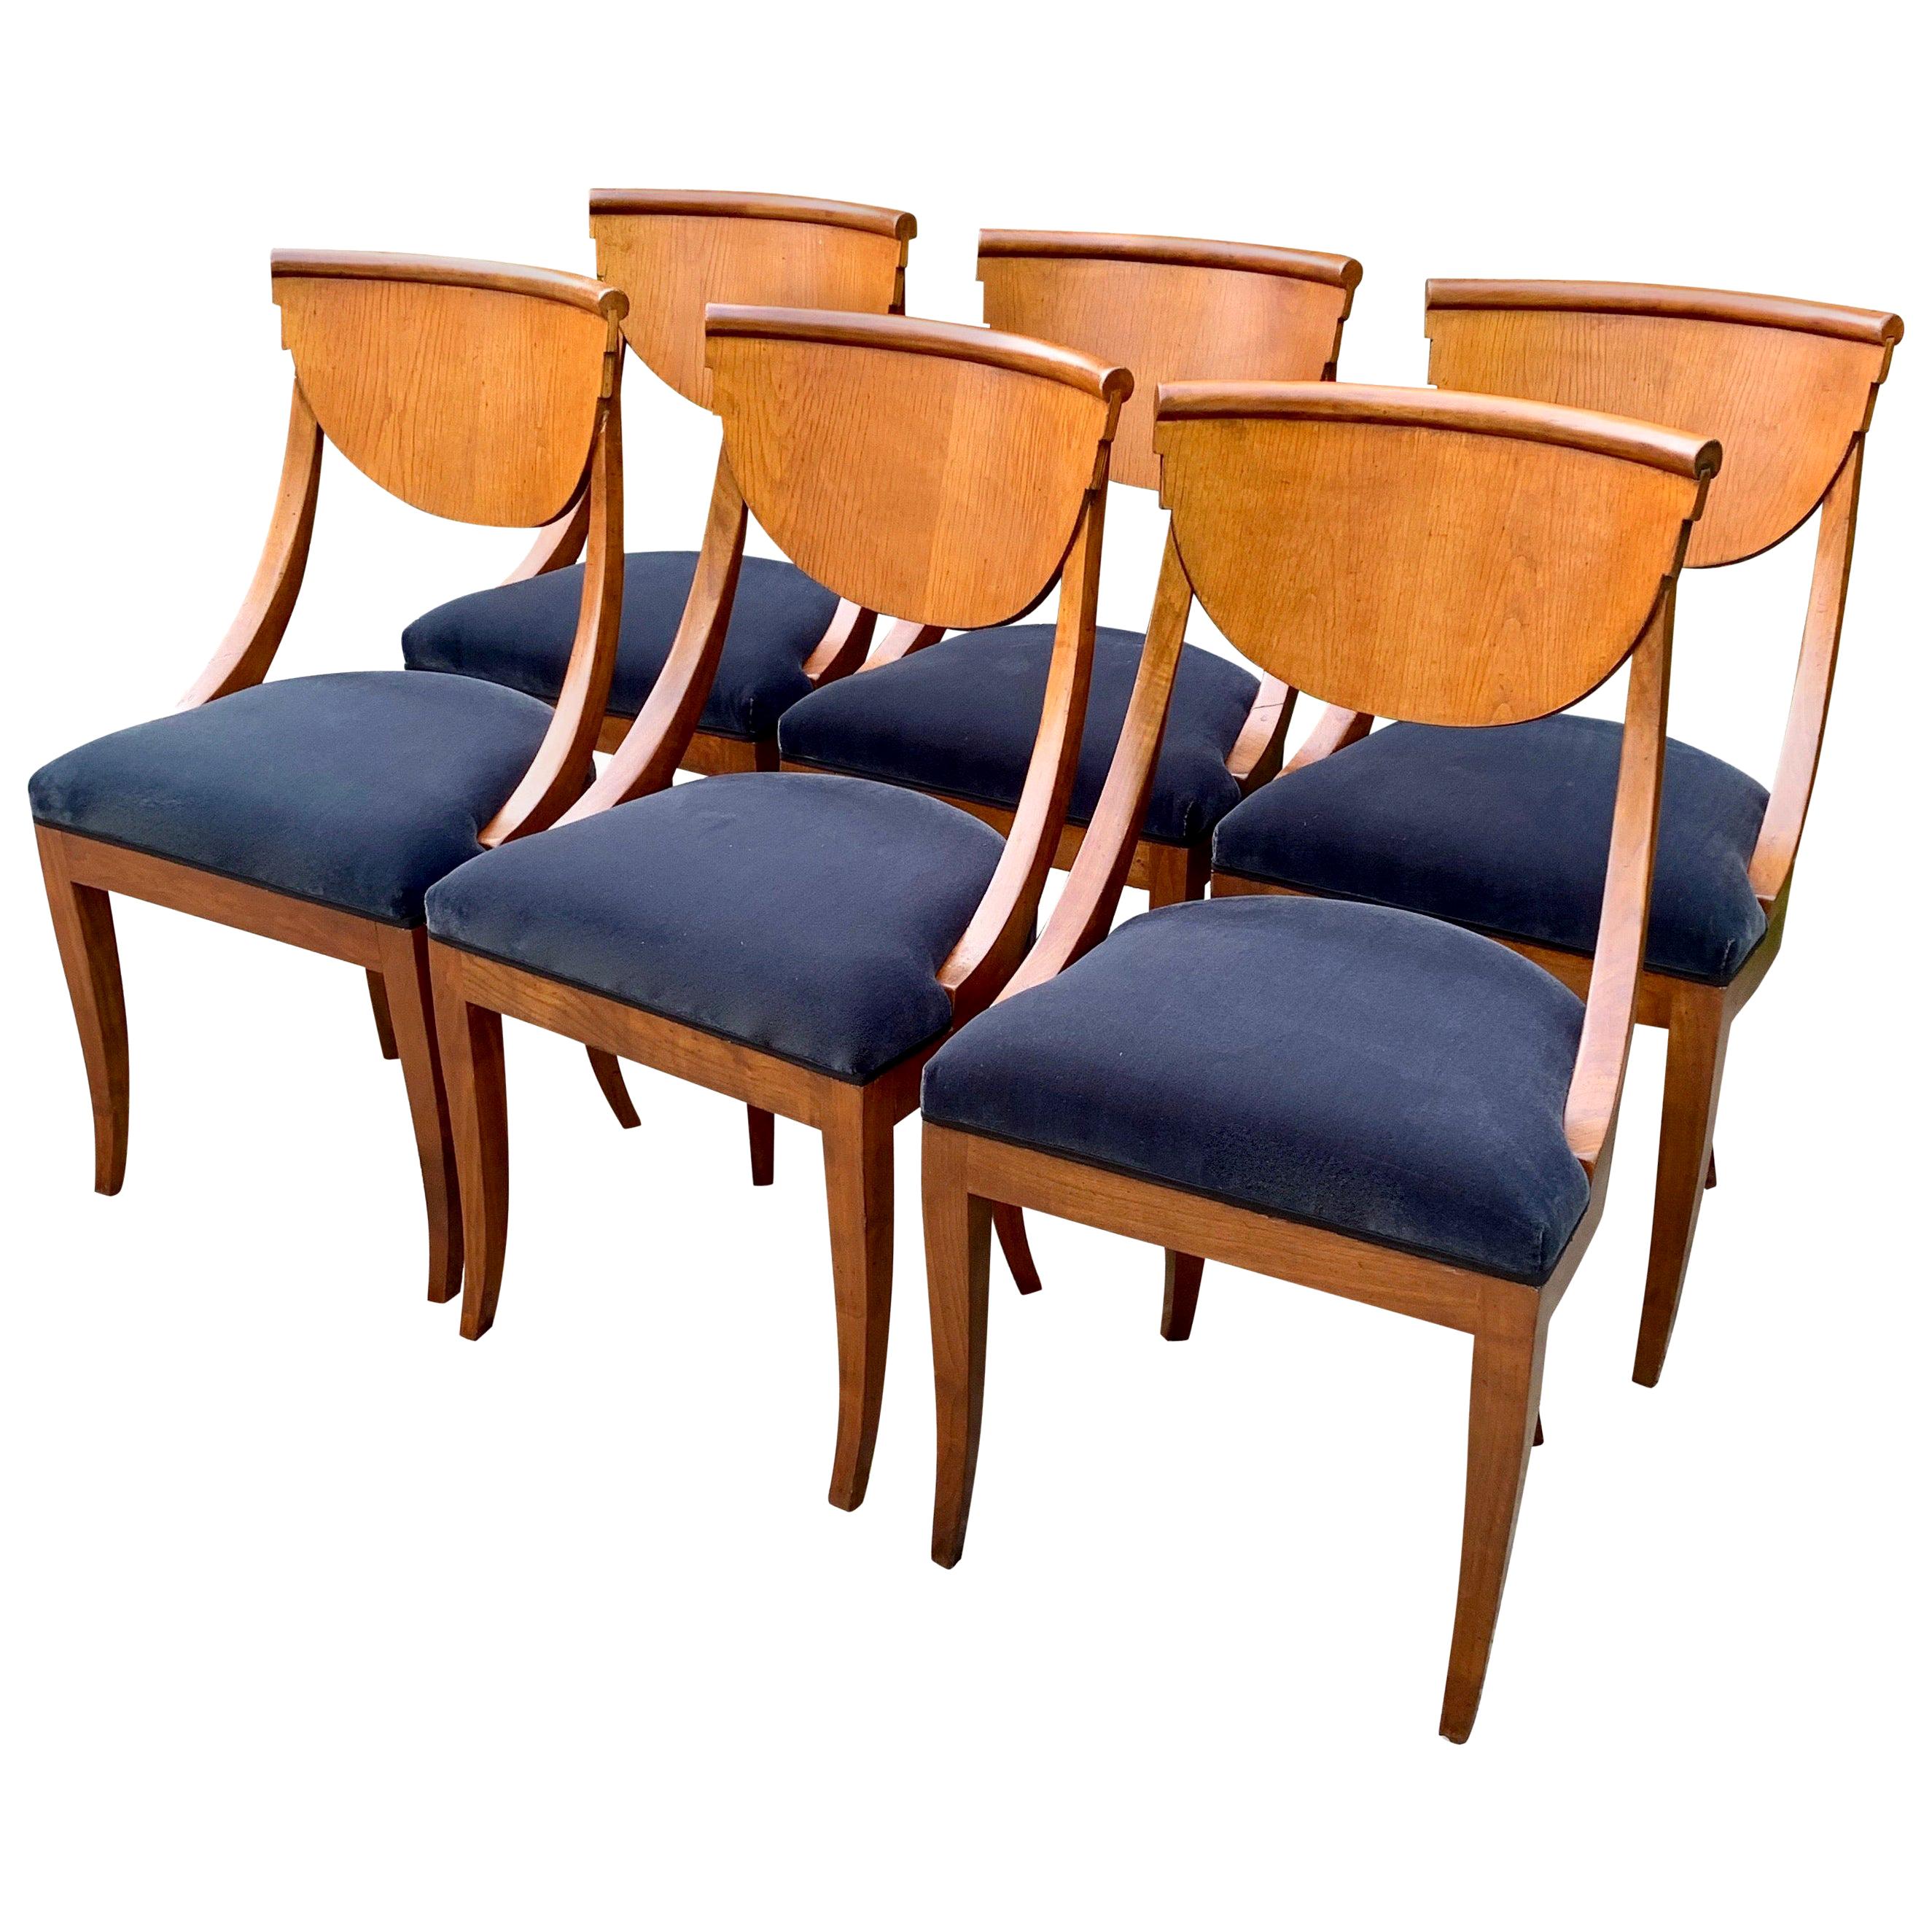 6 Upholstered Italian Maple Deco Dining Chairs